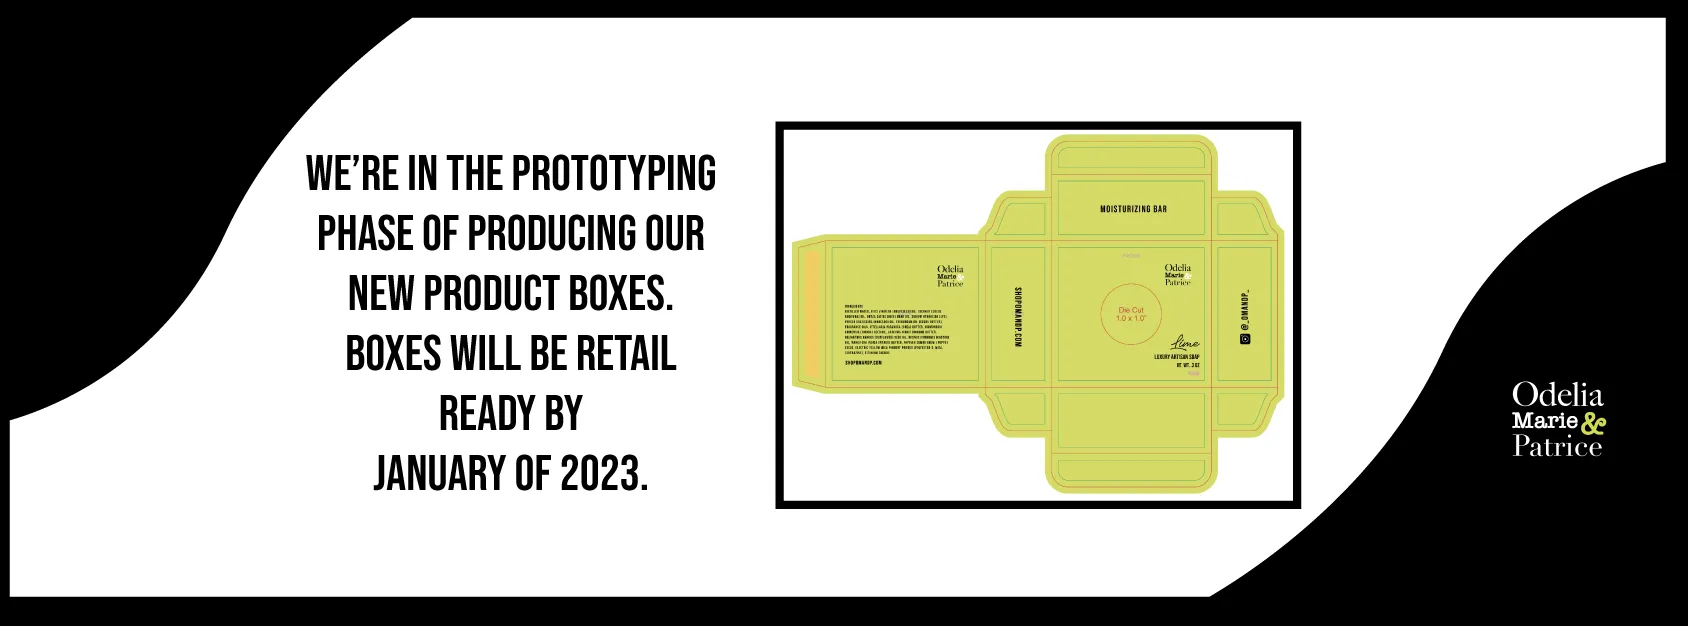 Graphic image of the prototyping phase of OMandP's new product boxes. 